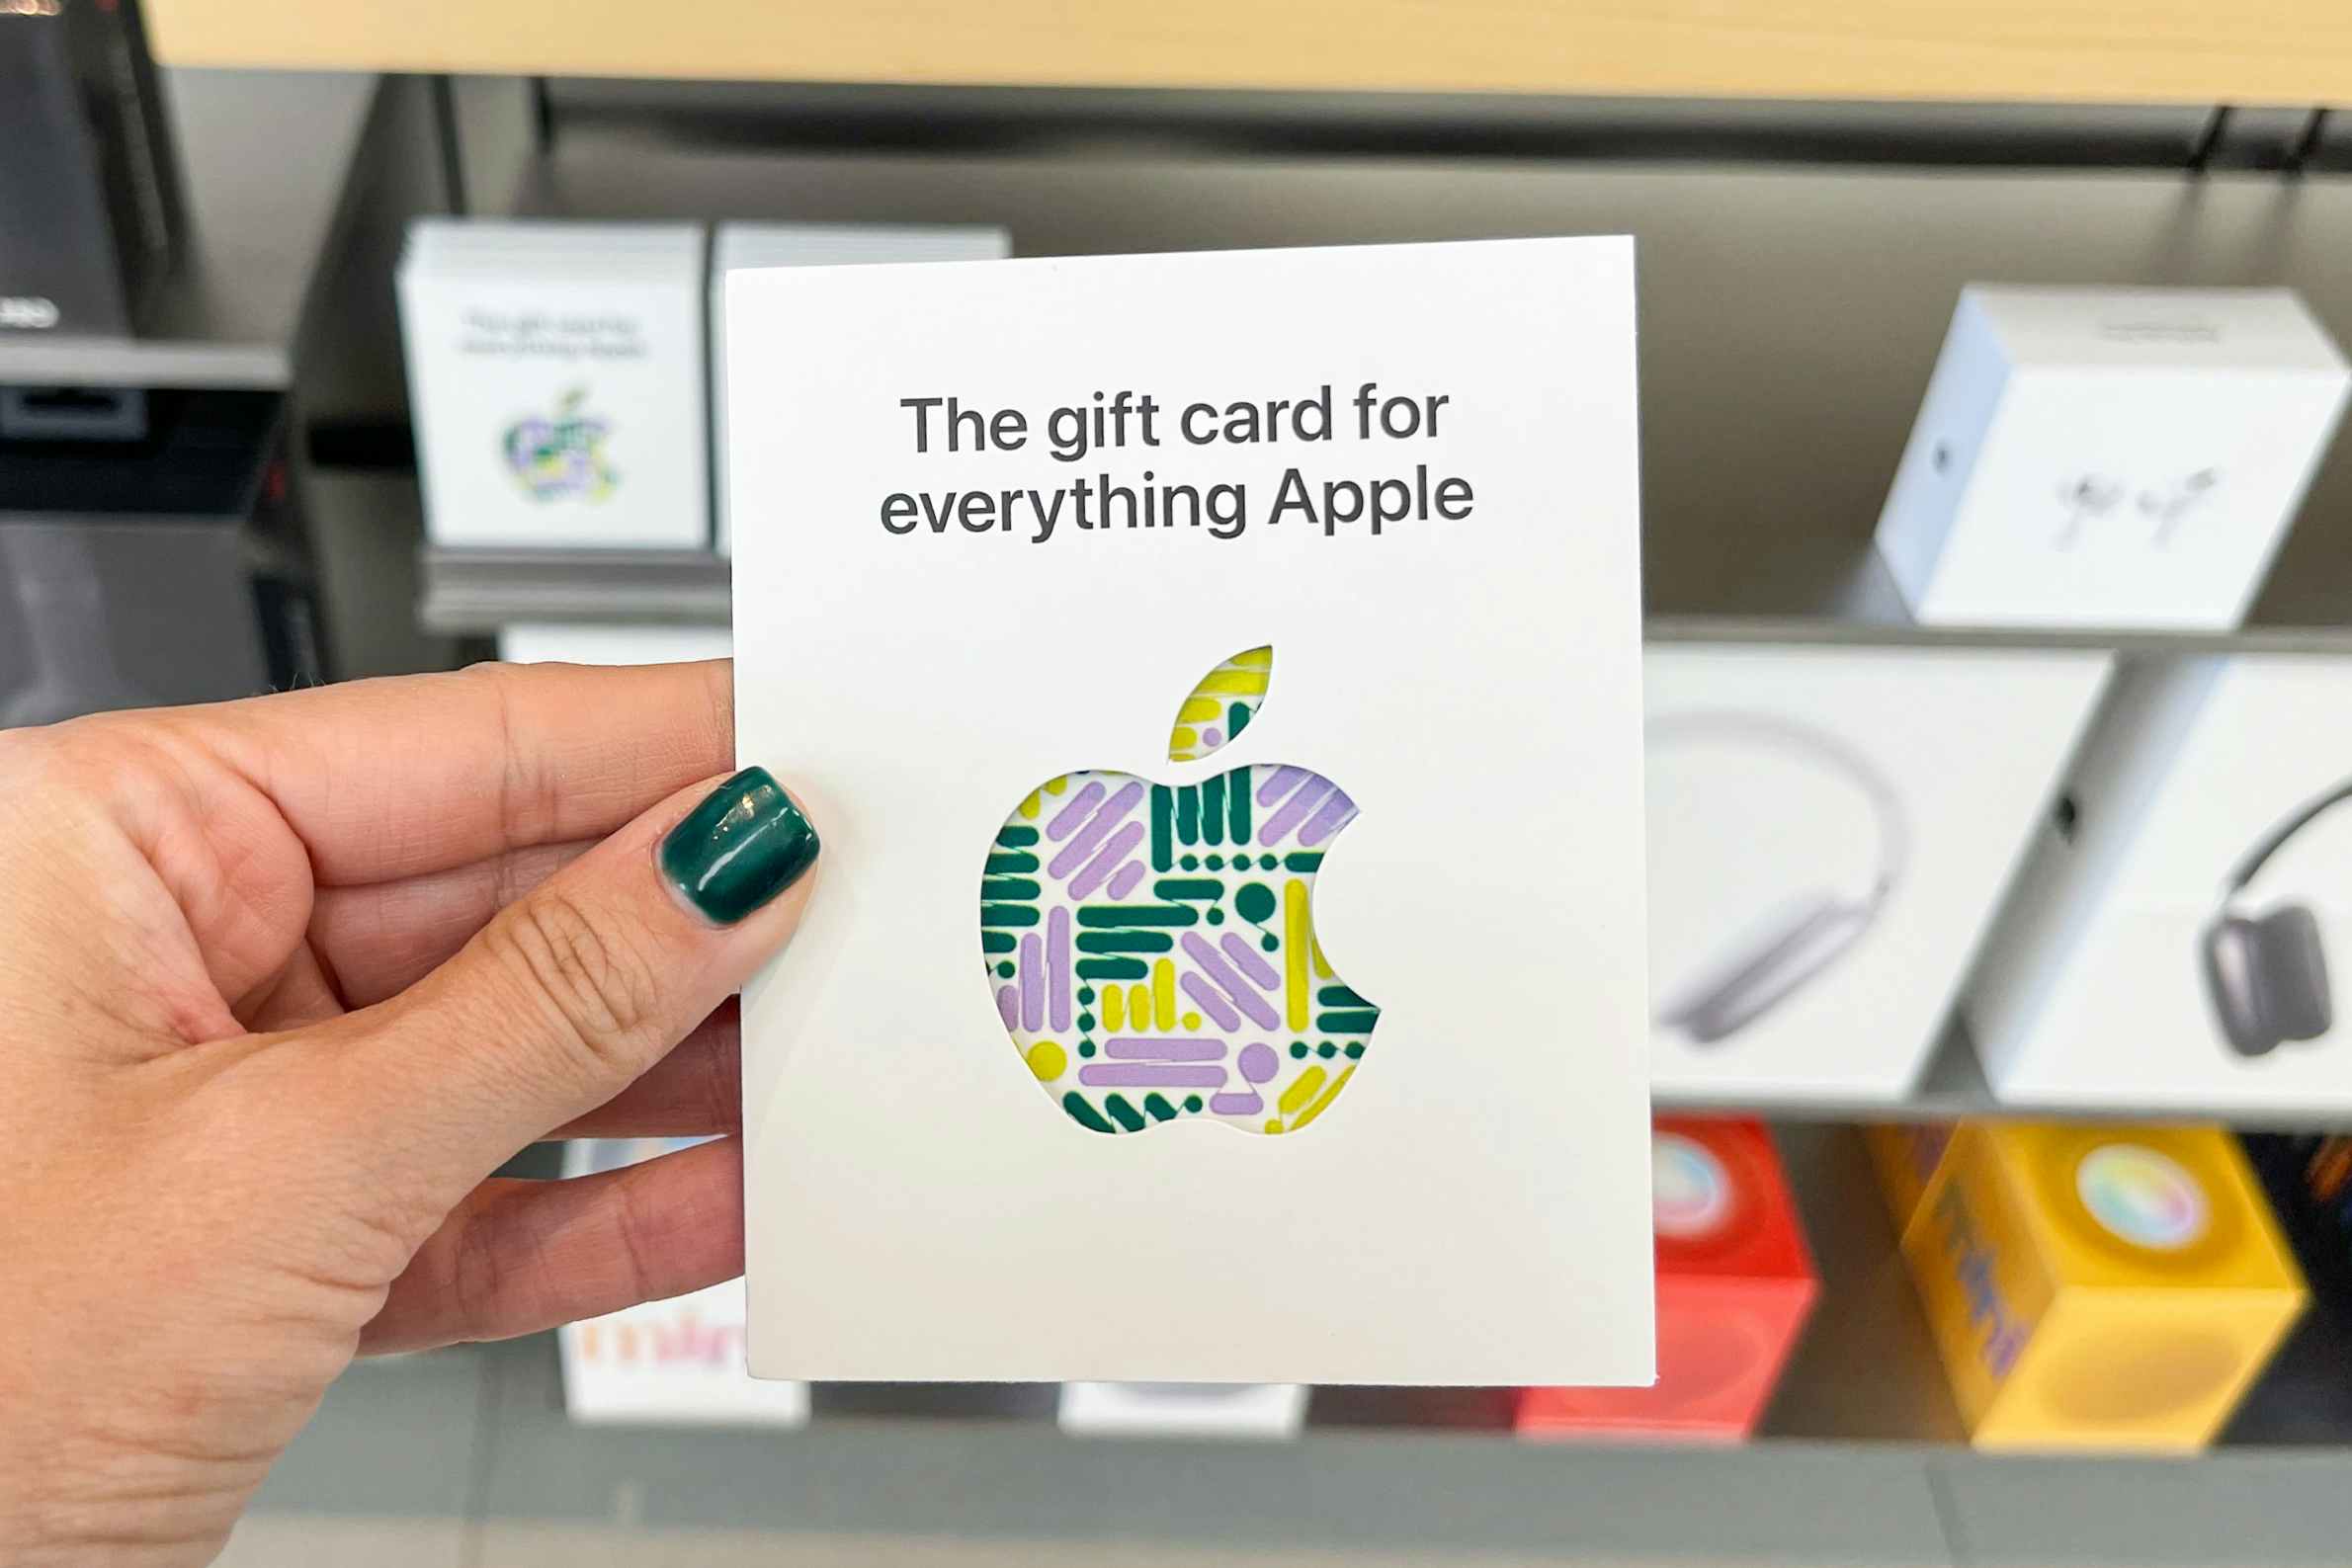 An Apple gift card held outlay hand in front of other Apple products.